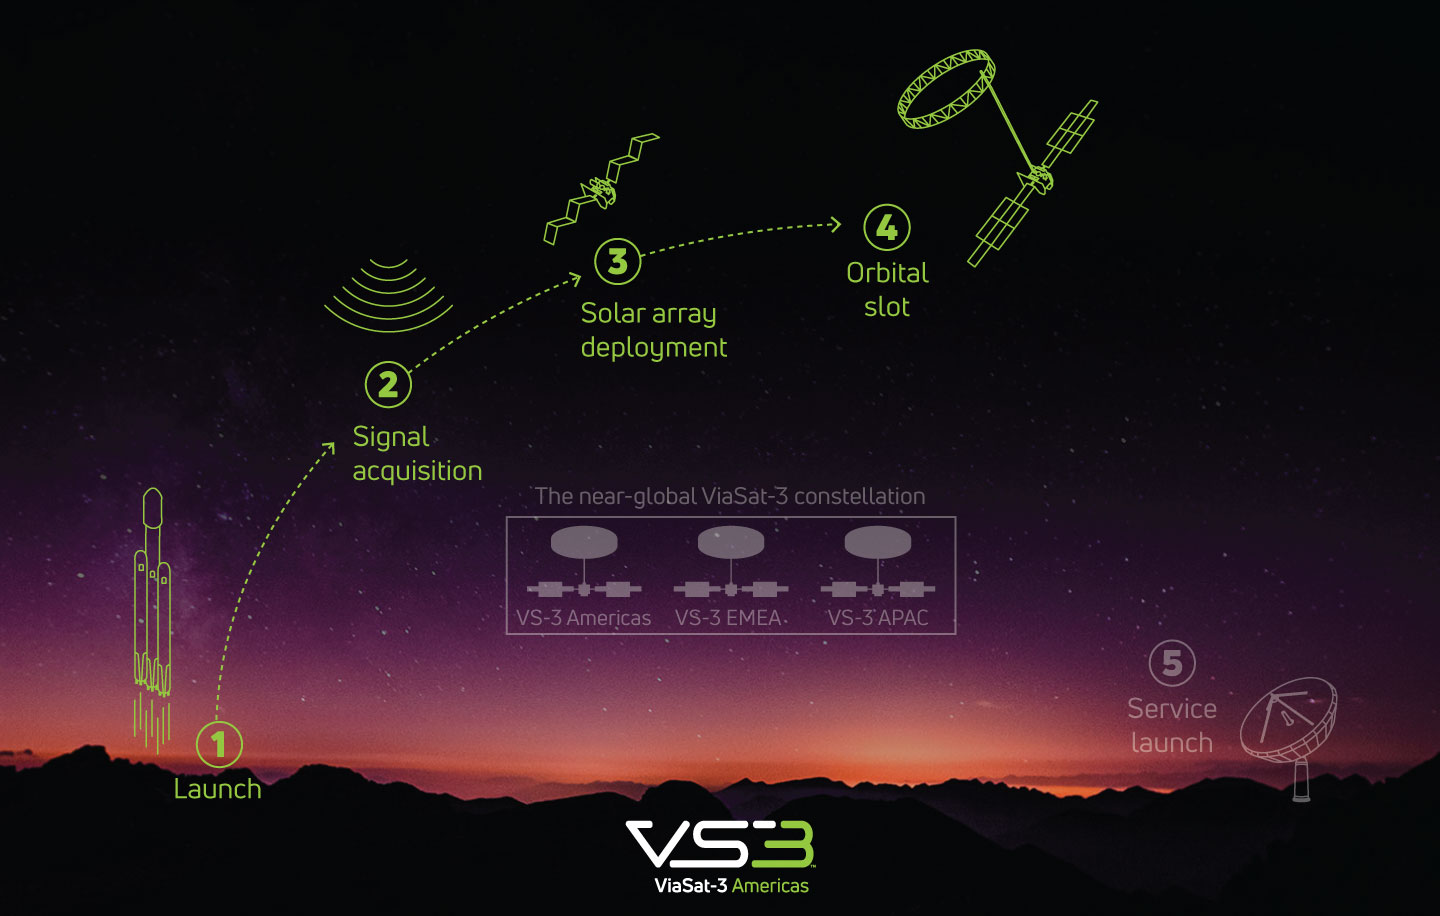 An. infographic showing the steps from satellite launch to launch of service